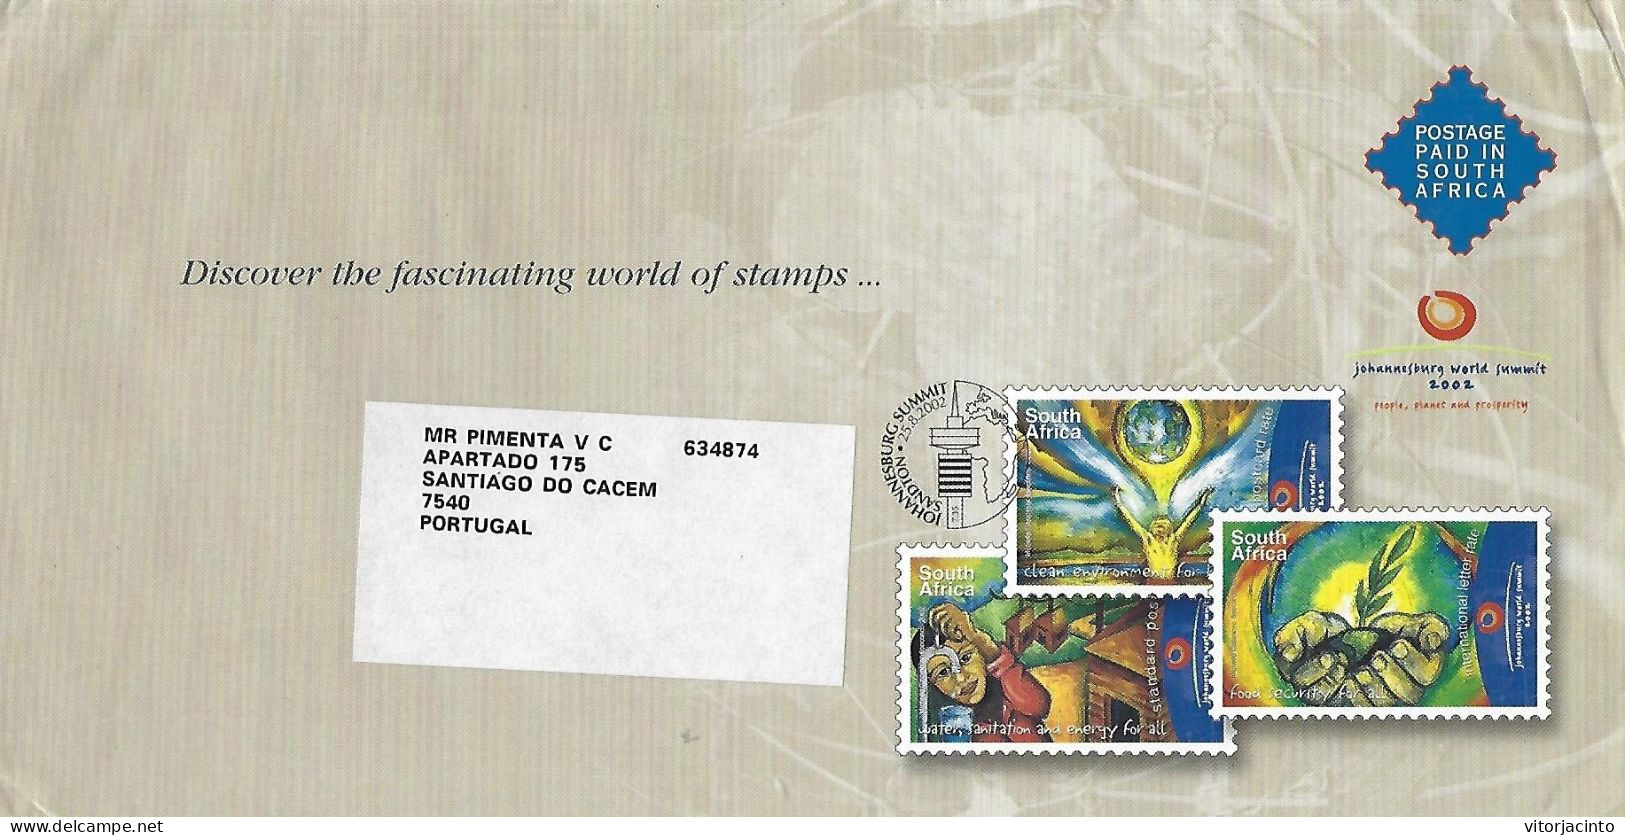 South Africa - Official Postal Cover Postage Paid - Covers & Documents